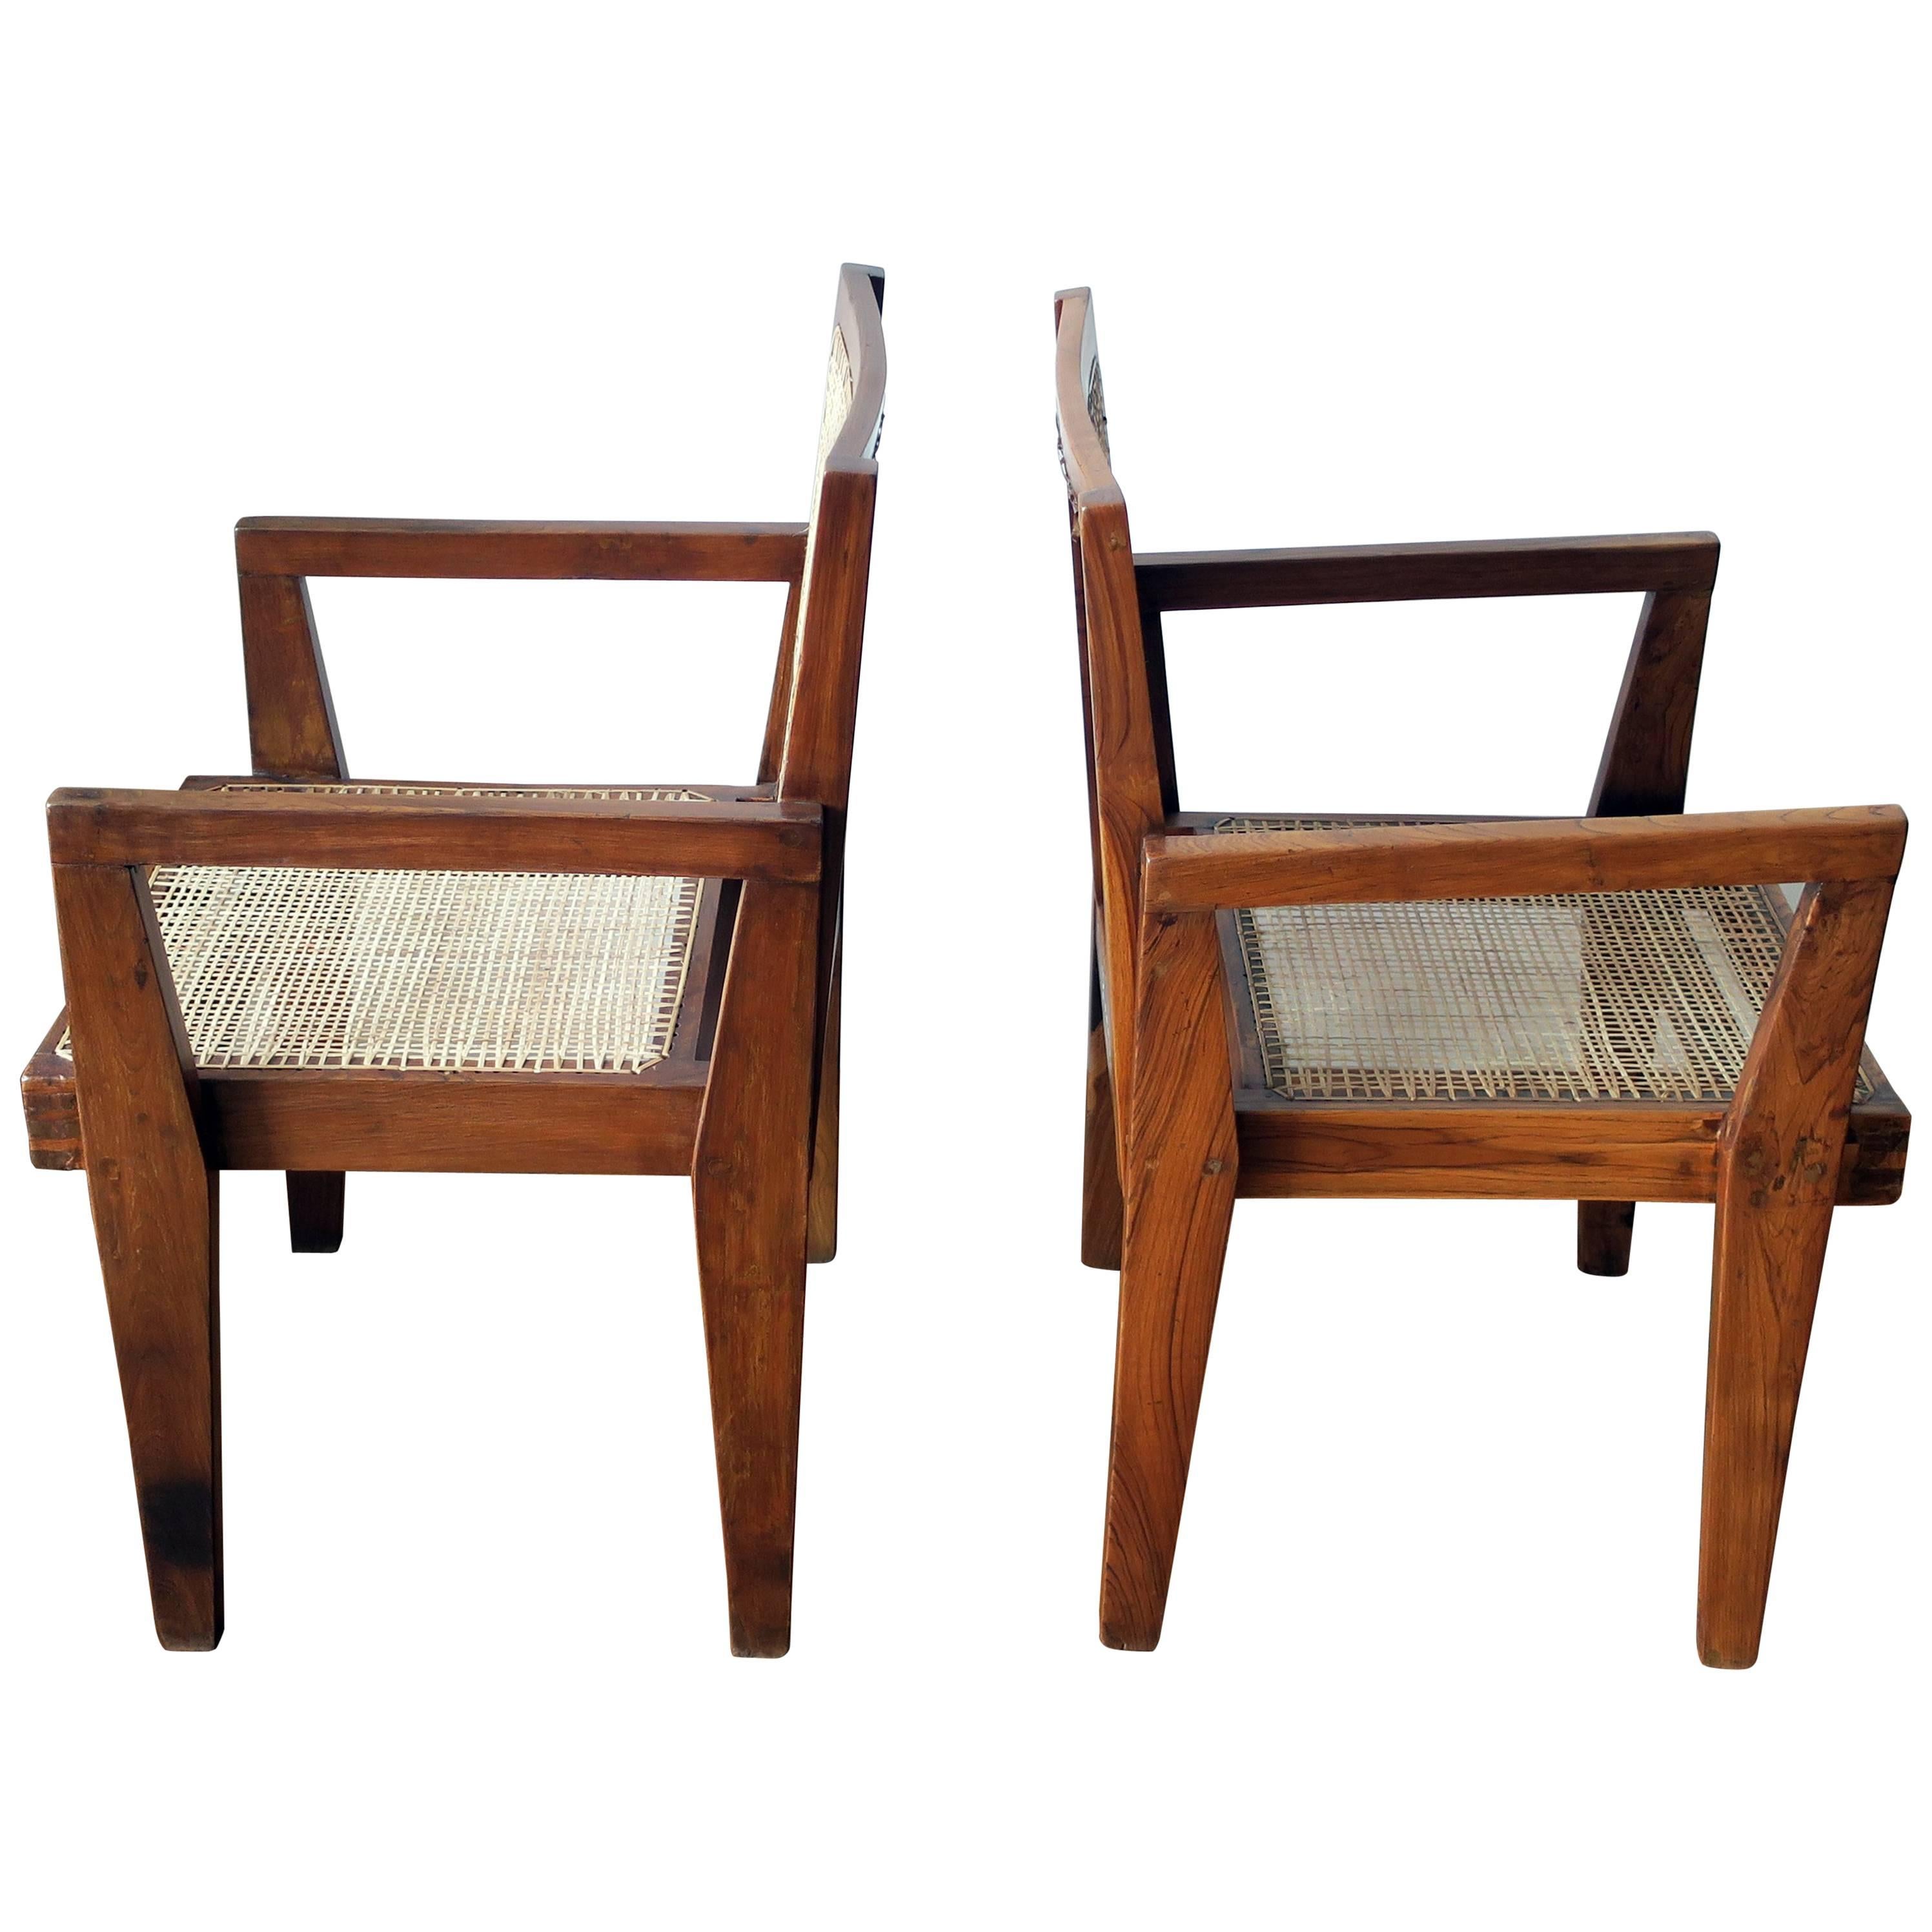 Pierre Jeanneret Pair of Take Down Armchairs, circa 1955-60